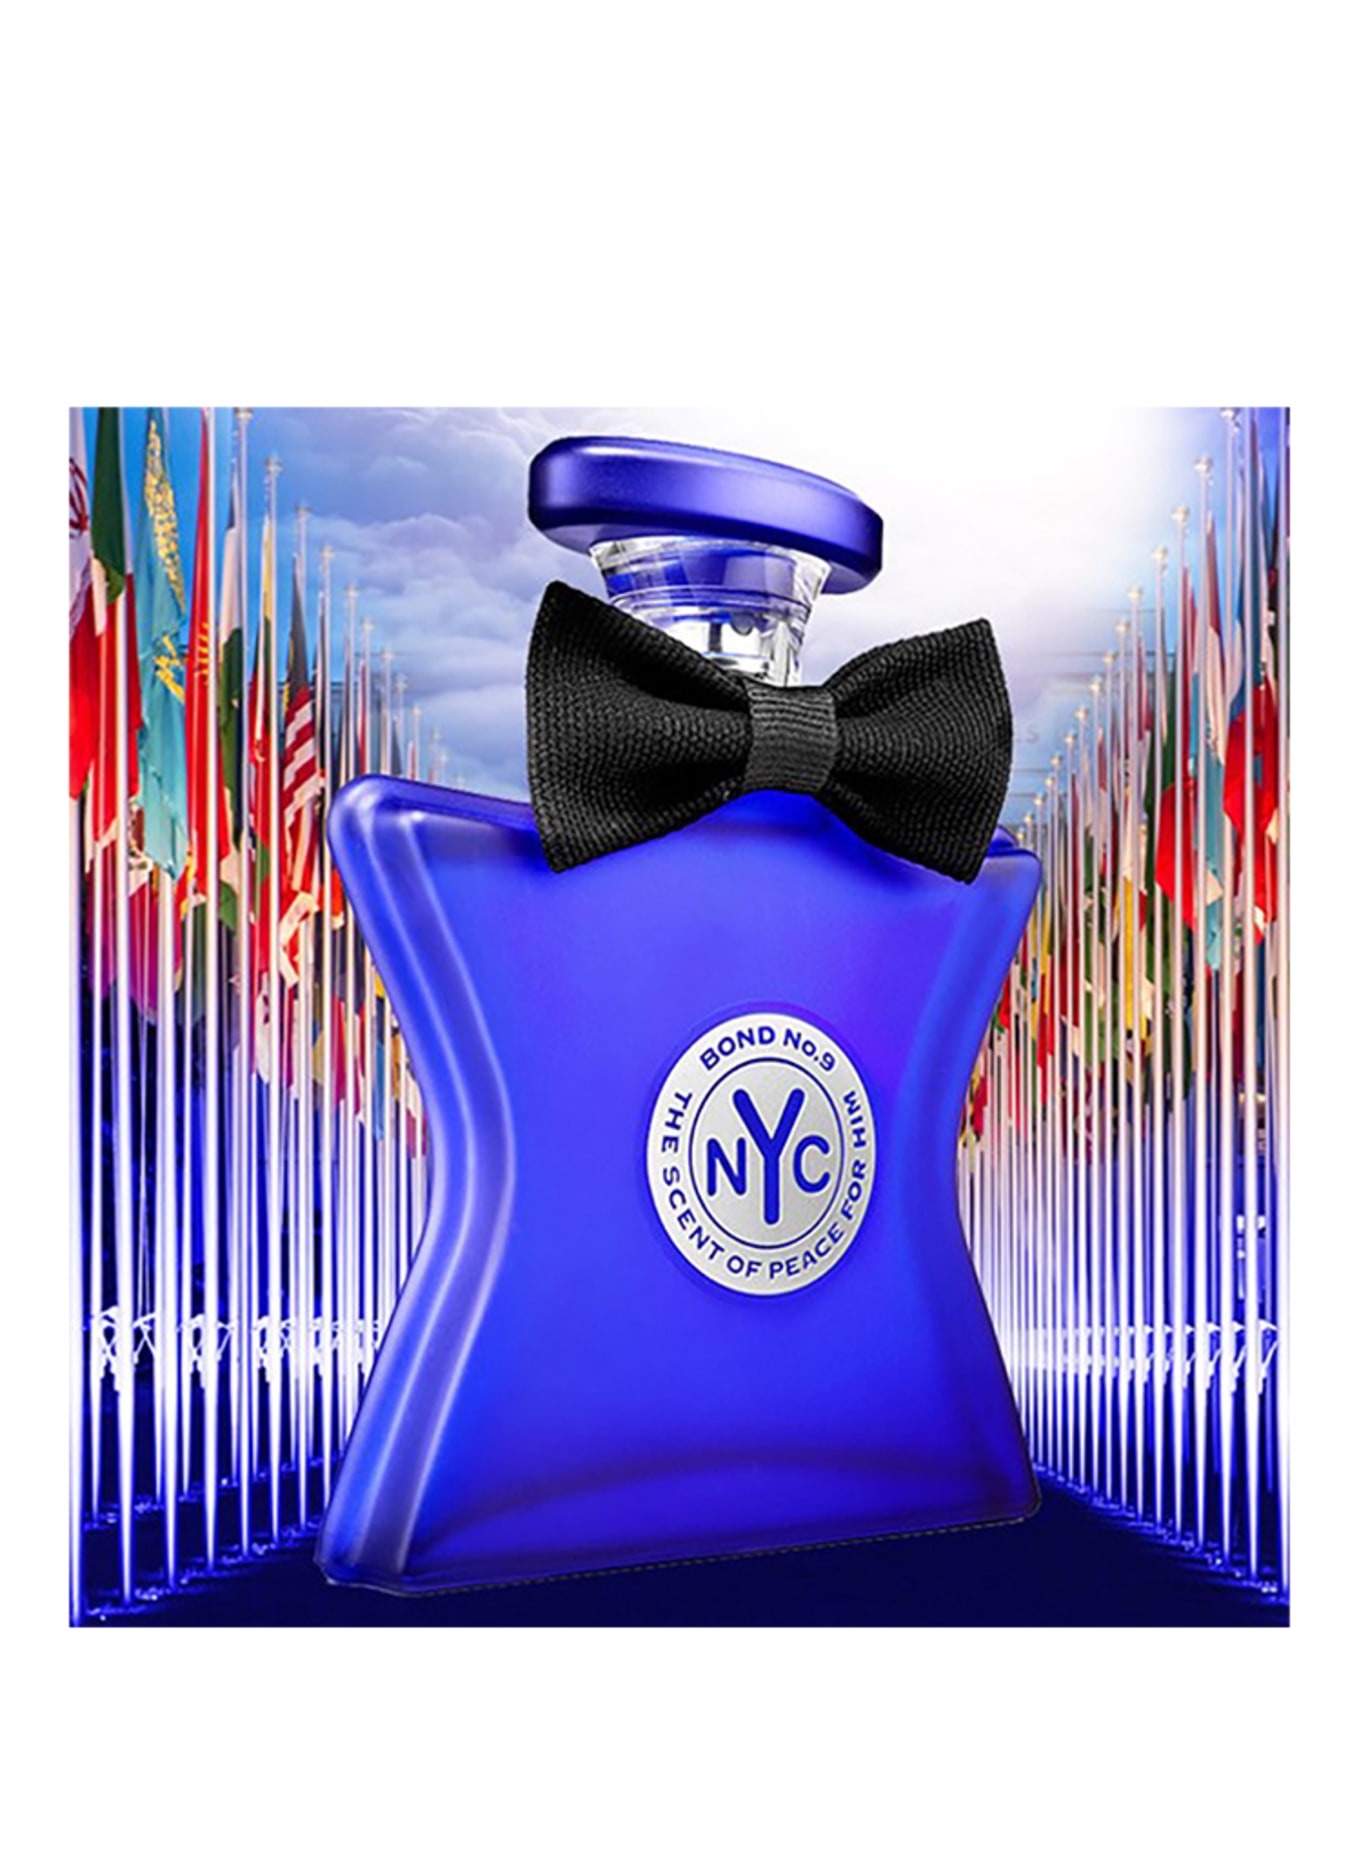 Bond No. 9 THE SCENT OF PEACE FOR HIM (Obrázek 2)